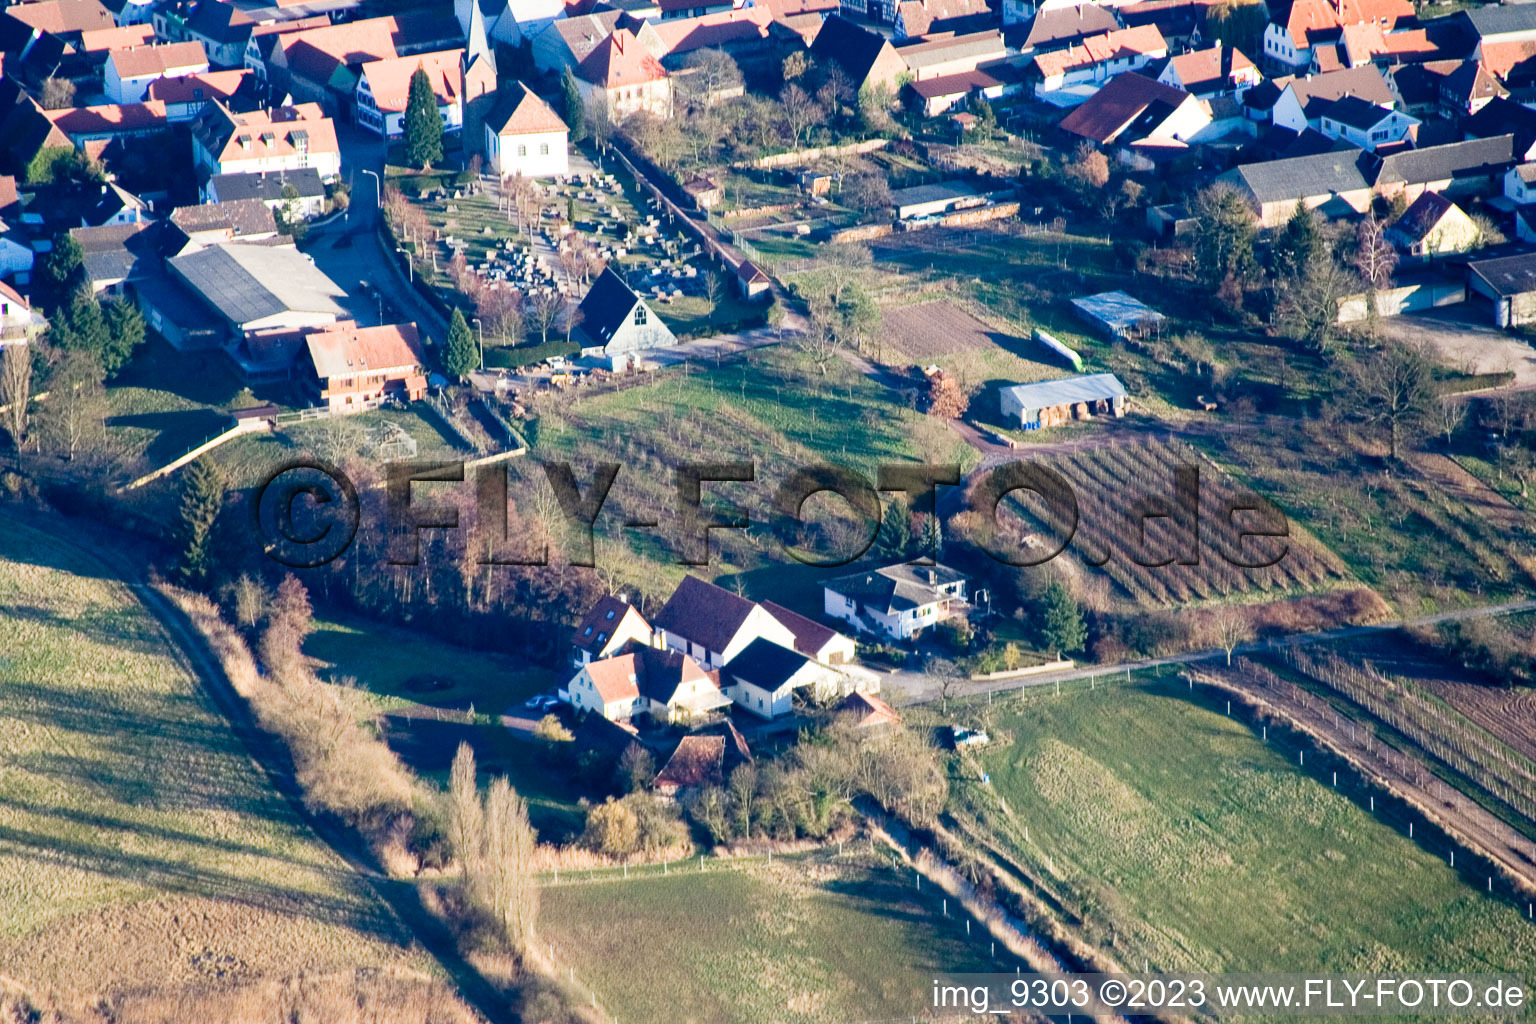 Winden mill in Winden in the state Rhineland-Palatinate, Germany seen from above